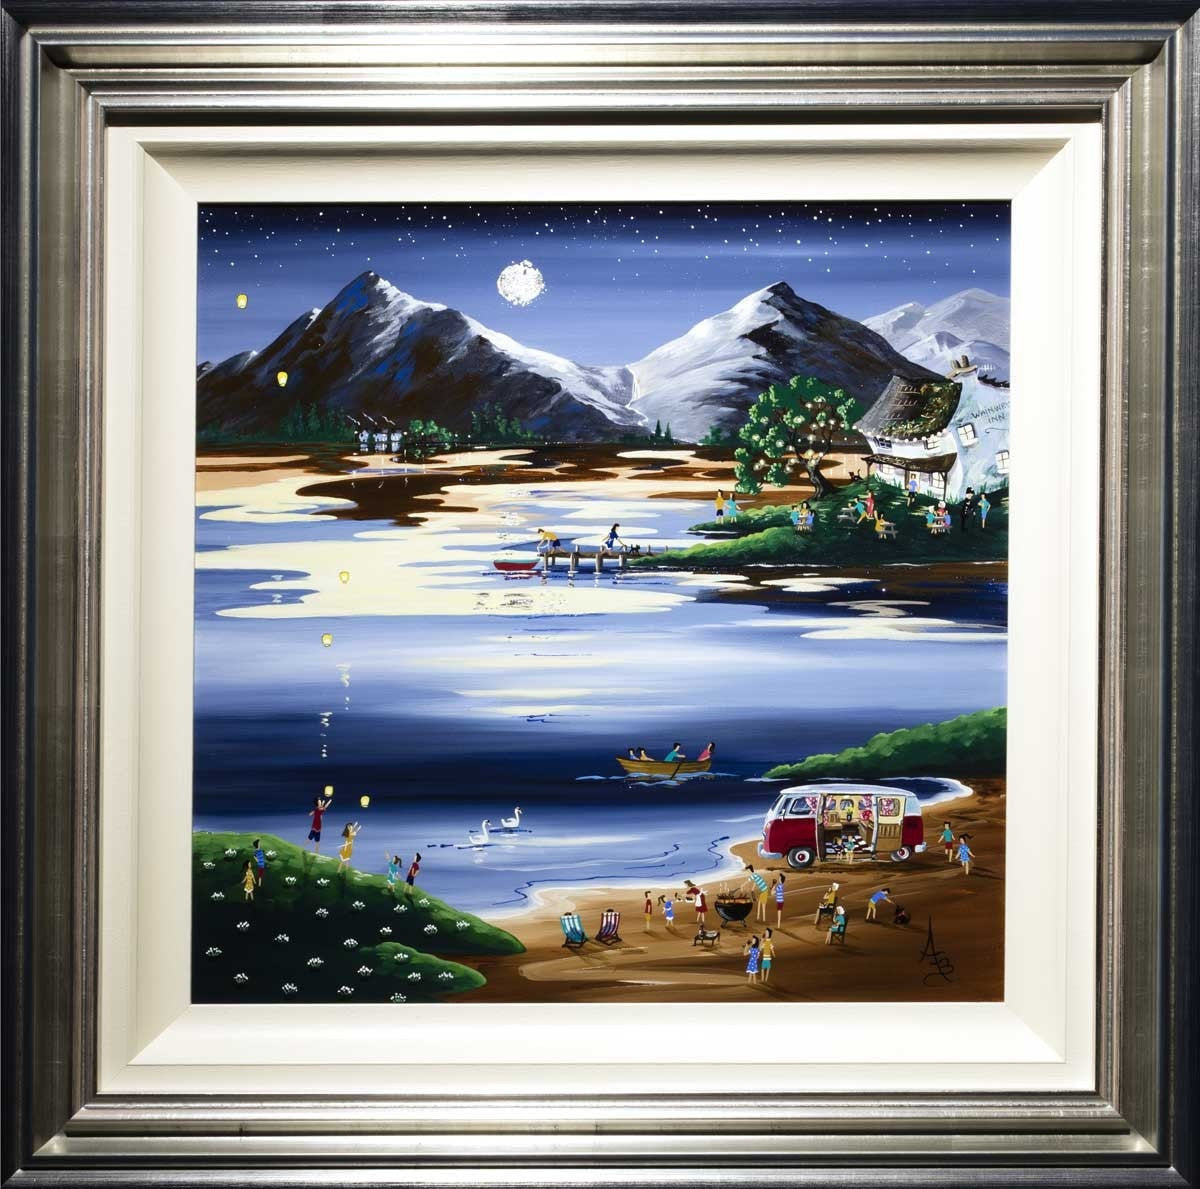 Lakeshore party - SOLD Anne Blundell